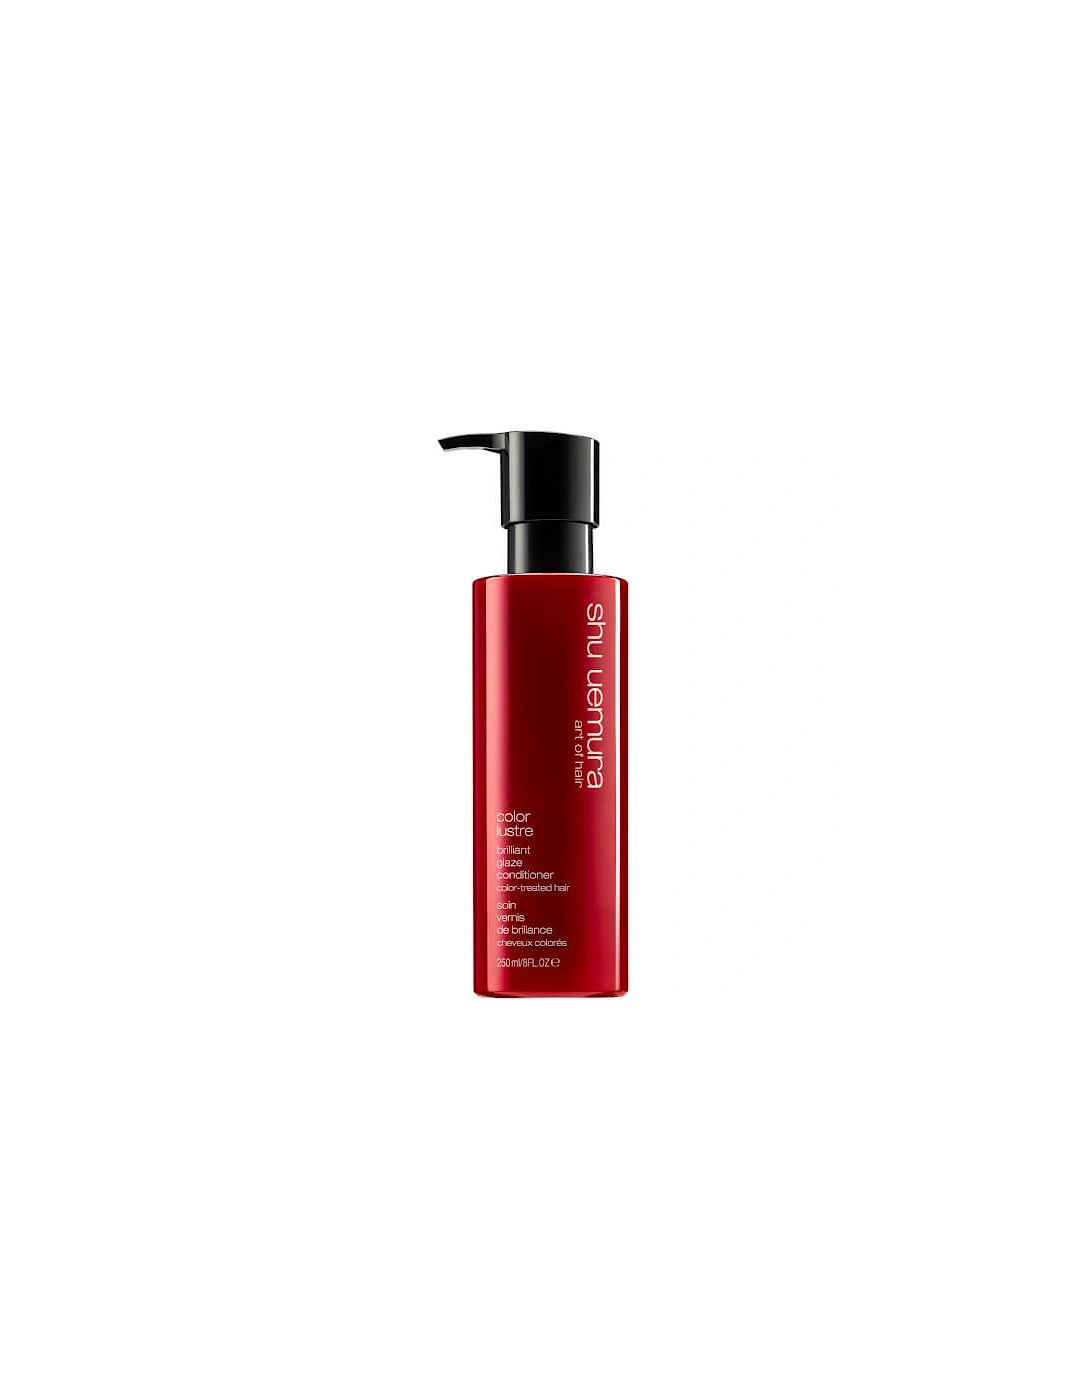 Art of Hair Colour Lustre Conditioner (250ml), 2 of 1